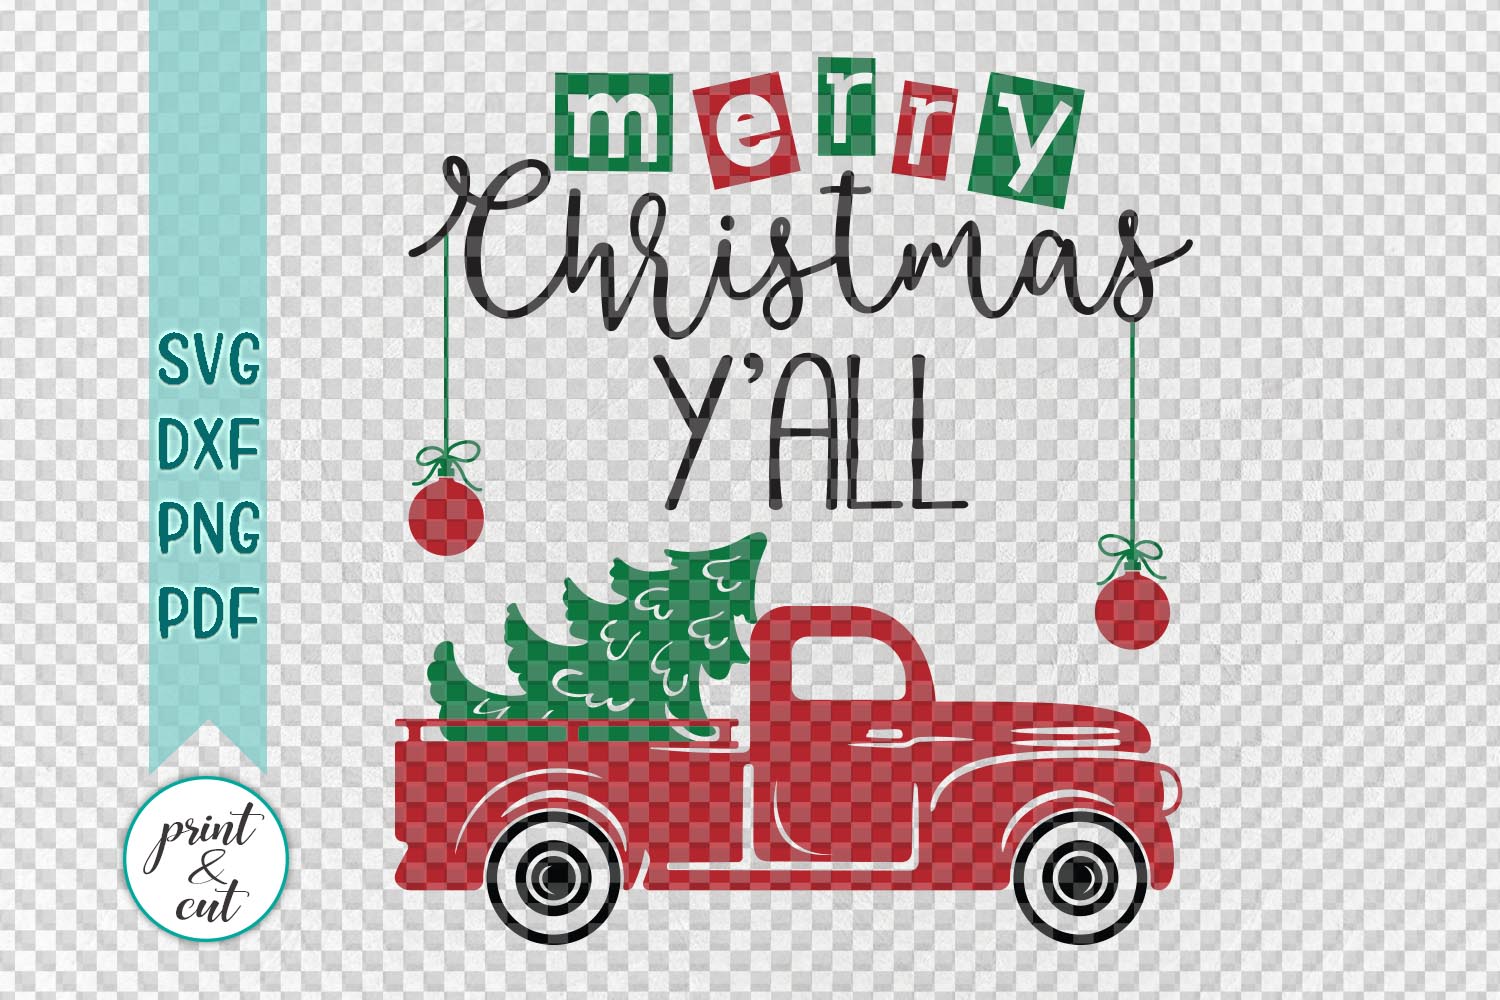 Download Merry Christmas Y'all Truck svg dxf files for vinyl HTV cut